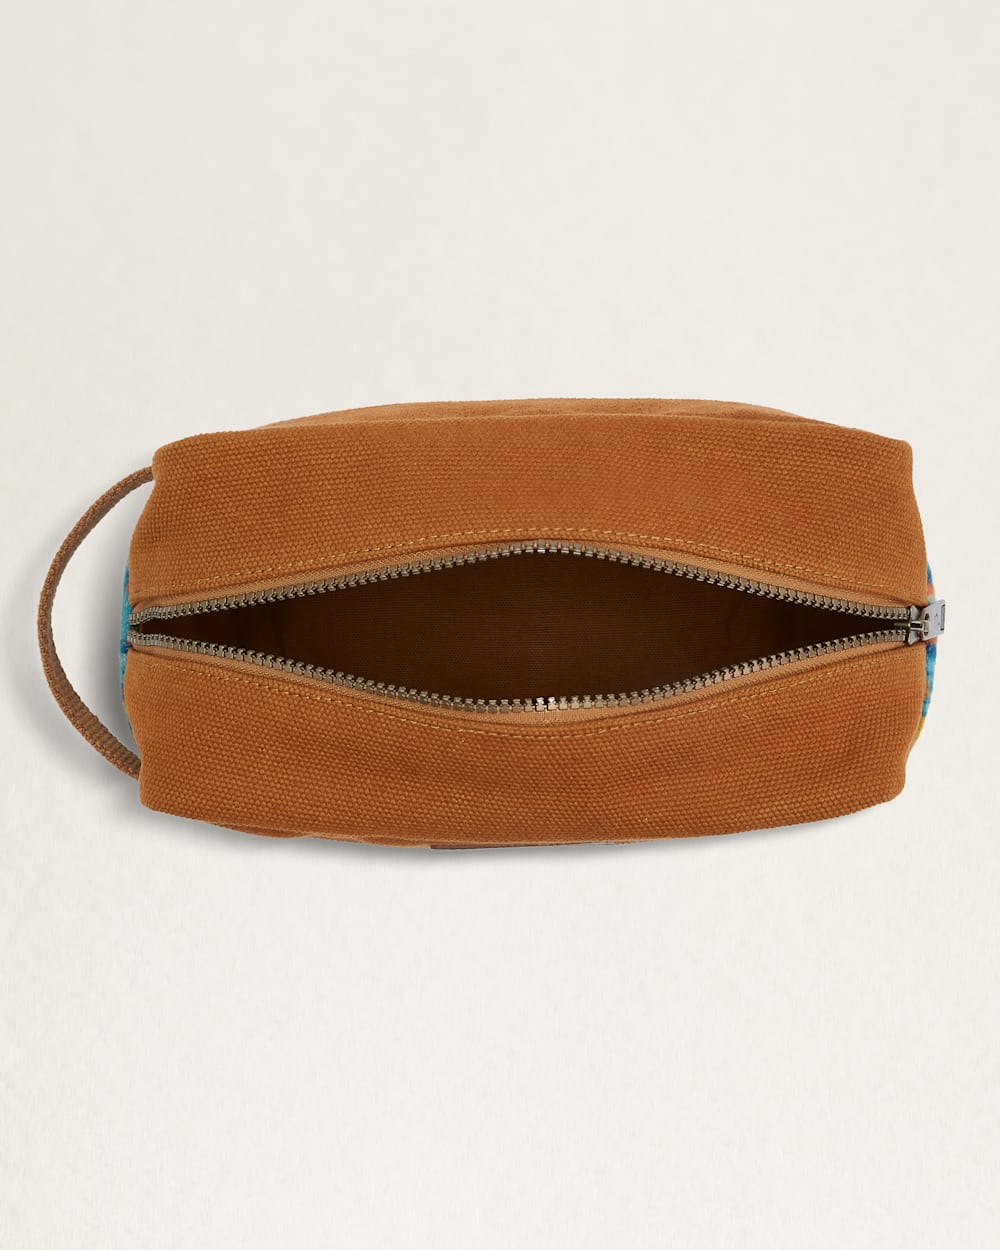 ALTERNATE VIEW OF CARRYALL POUCH IN TURQUOISE ALTO MESA image number 2